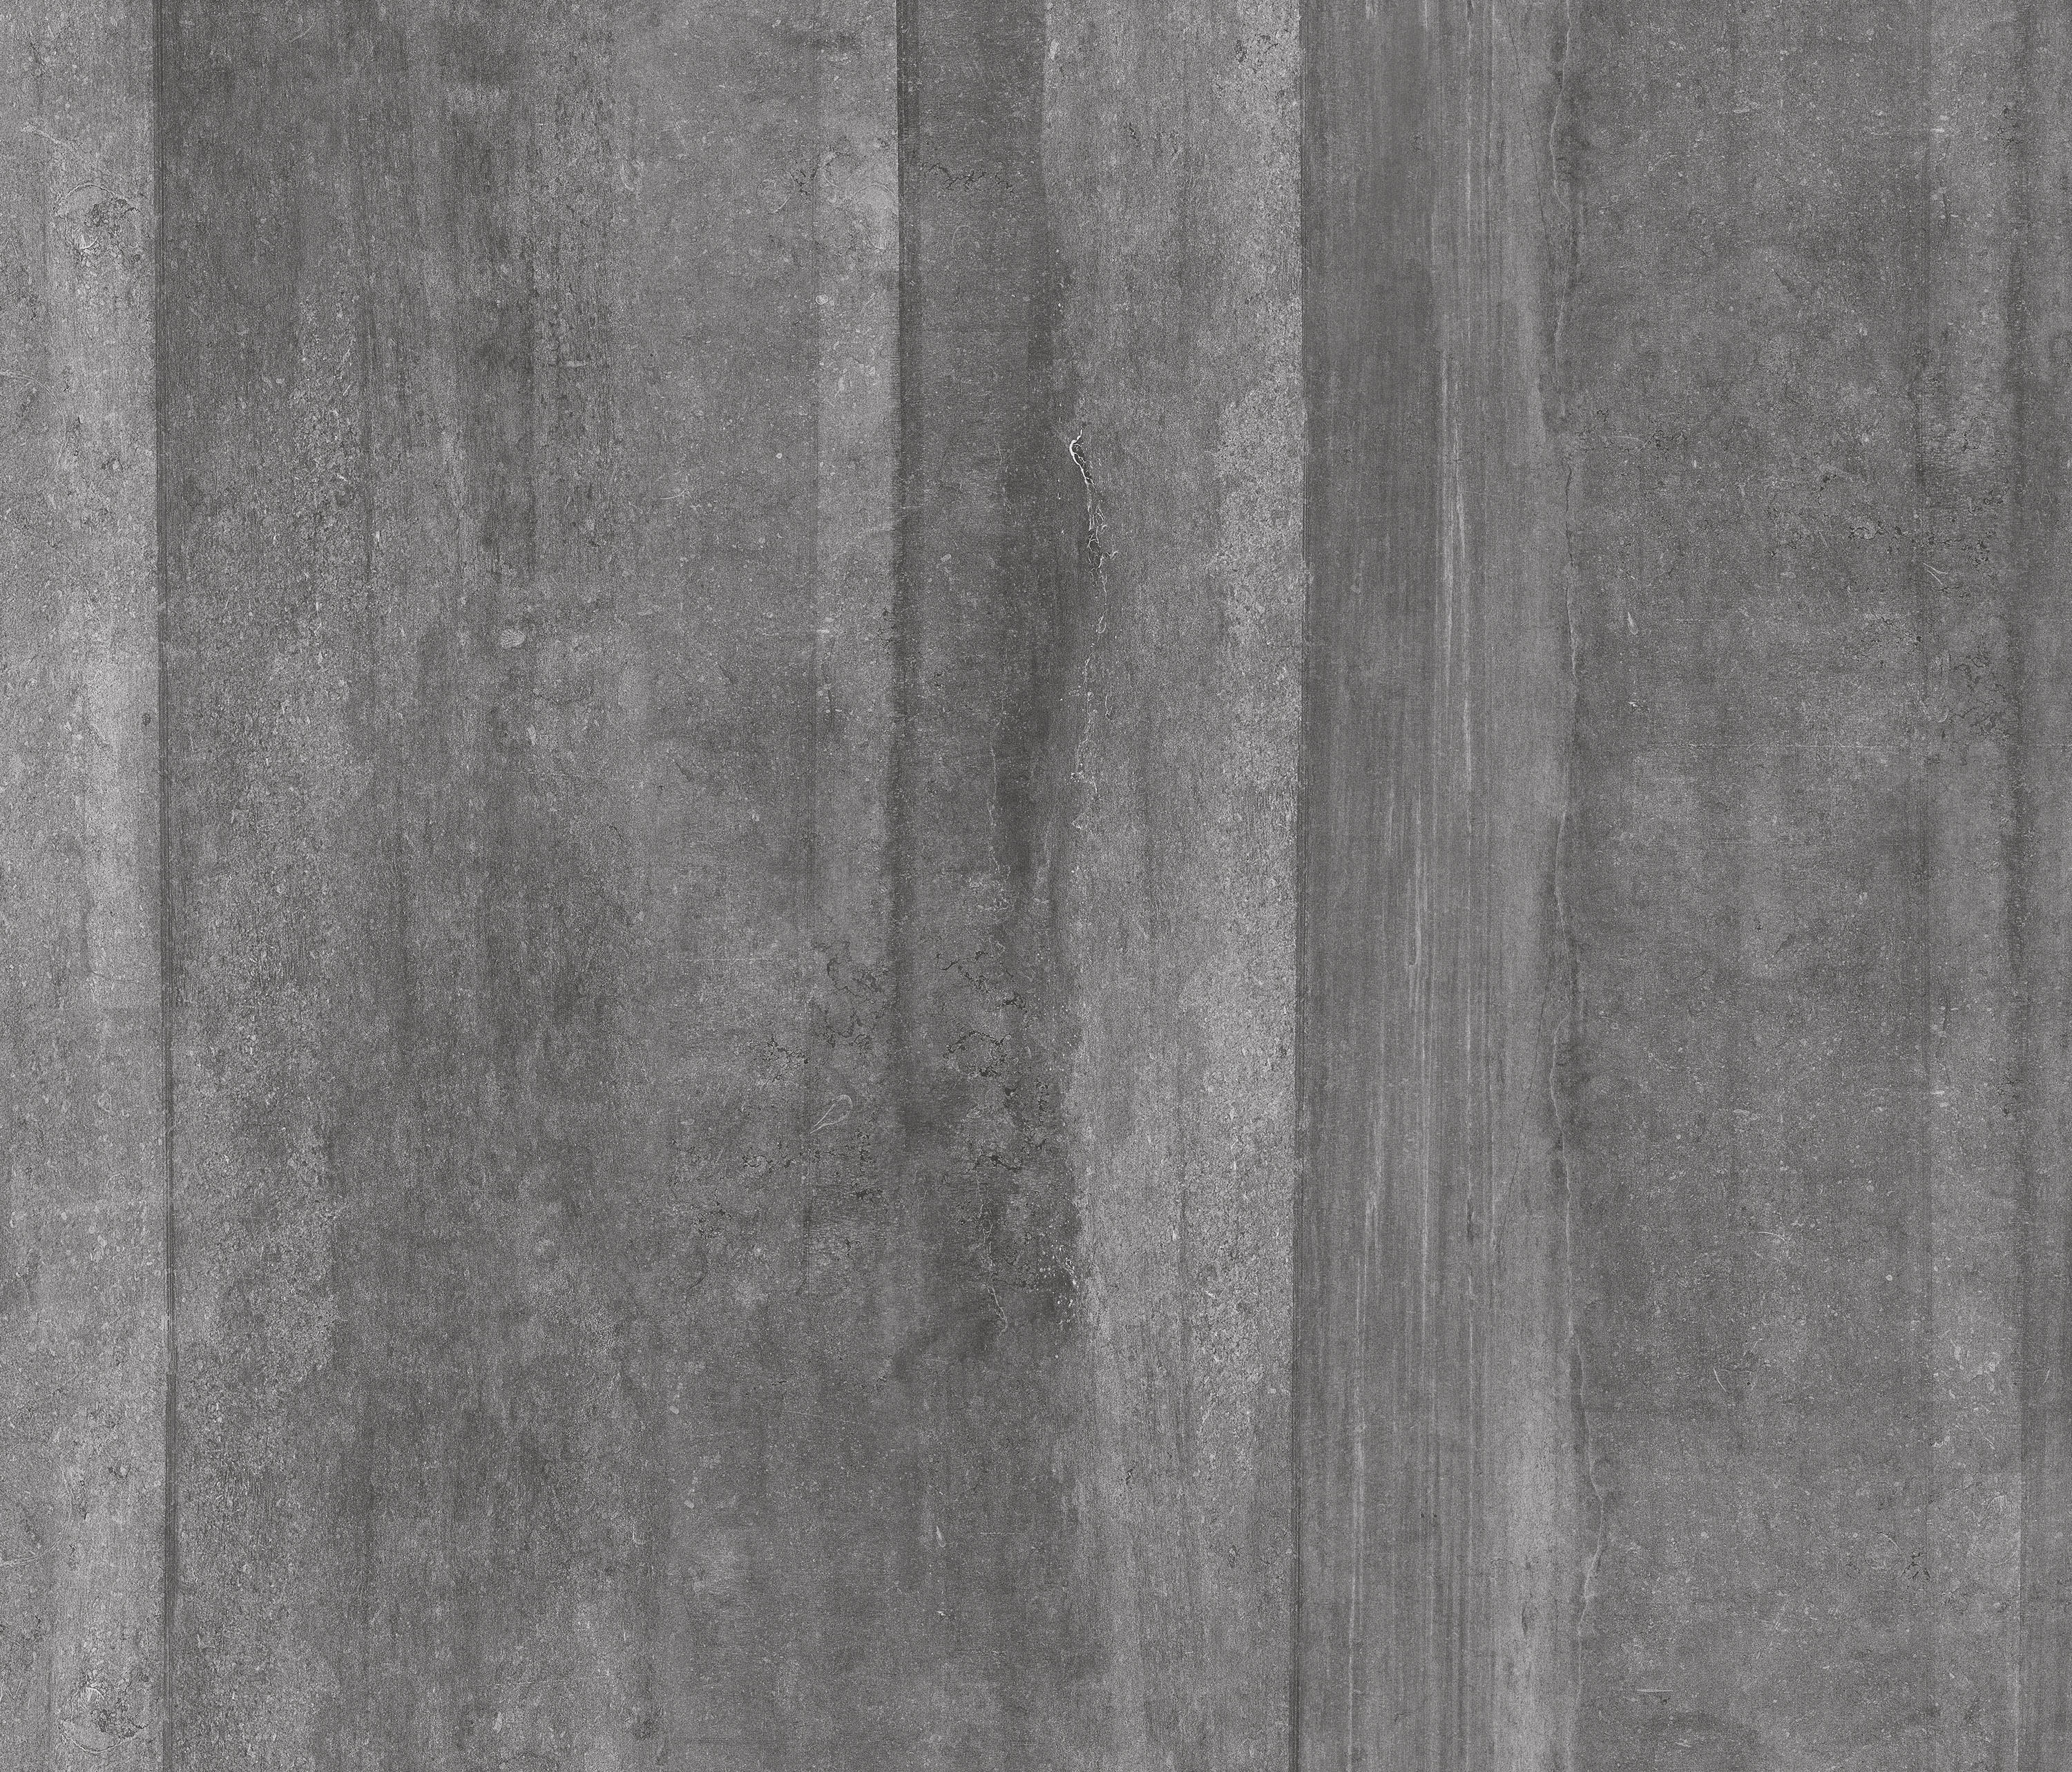 DAMASKED CONCRETE - Wall coverings / wallpapers from ...